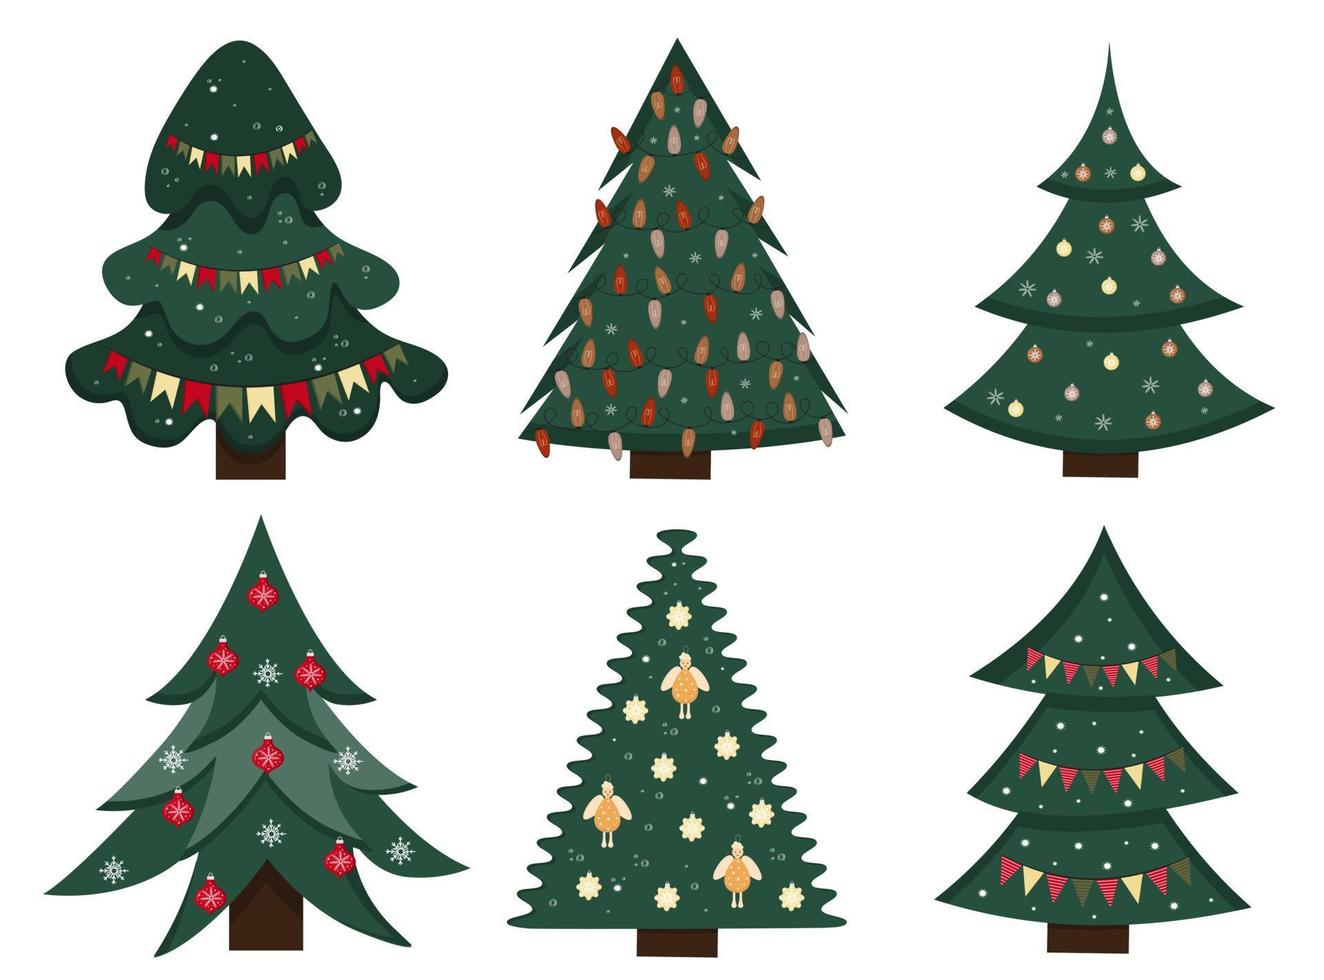 Set of Christmas tree. New Years tree with heralds, light bulb. Decorated xmas trees. Suitable for greeting card, invitation, banner, web. Elements for winter holidays decor. vector